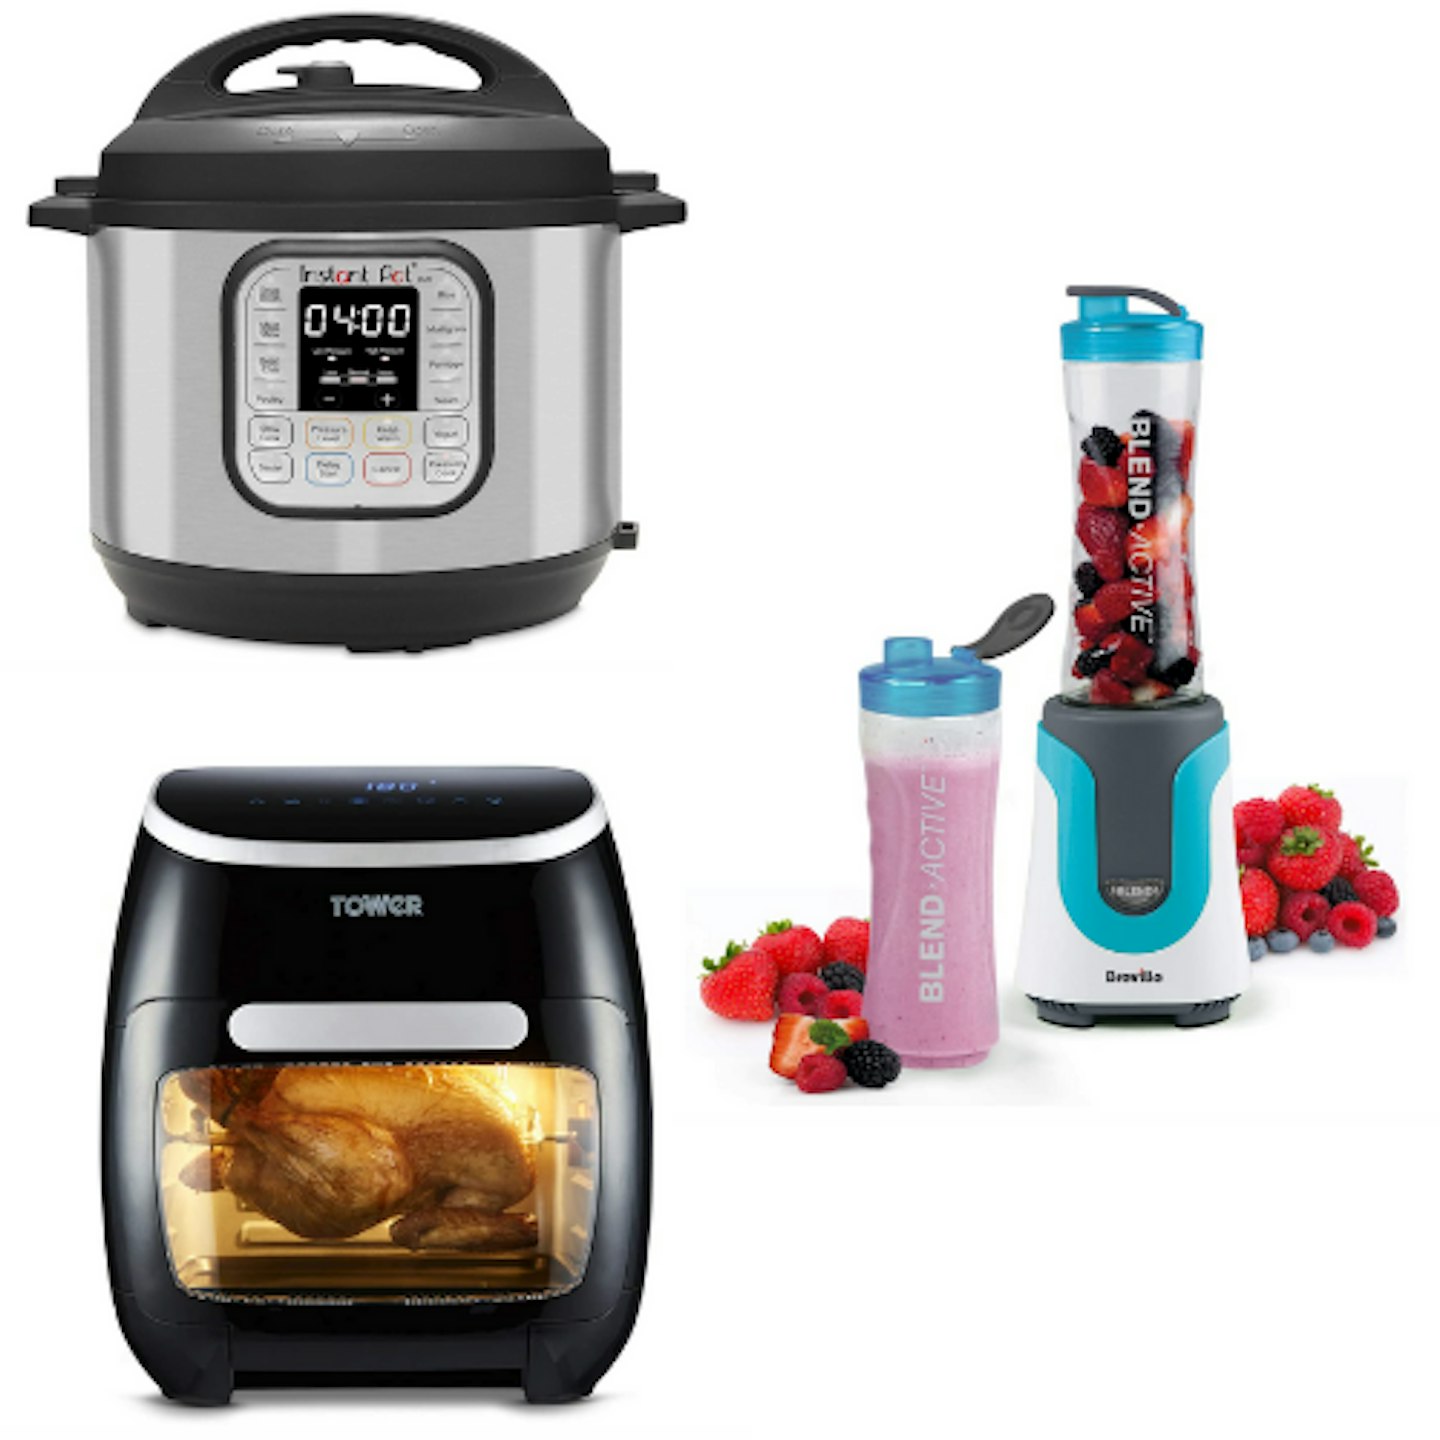 Up to 47% off Kitchen Appliances from Breville, Tower, Philips and more